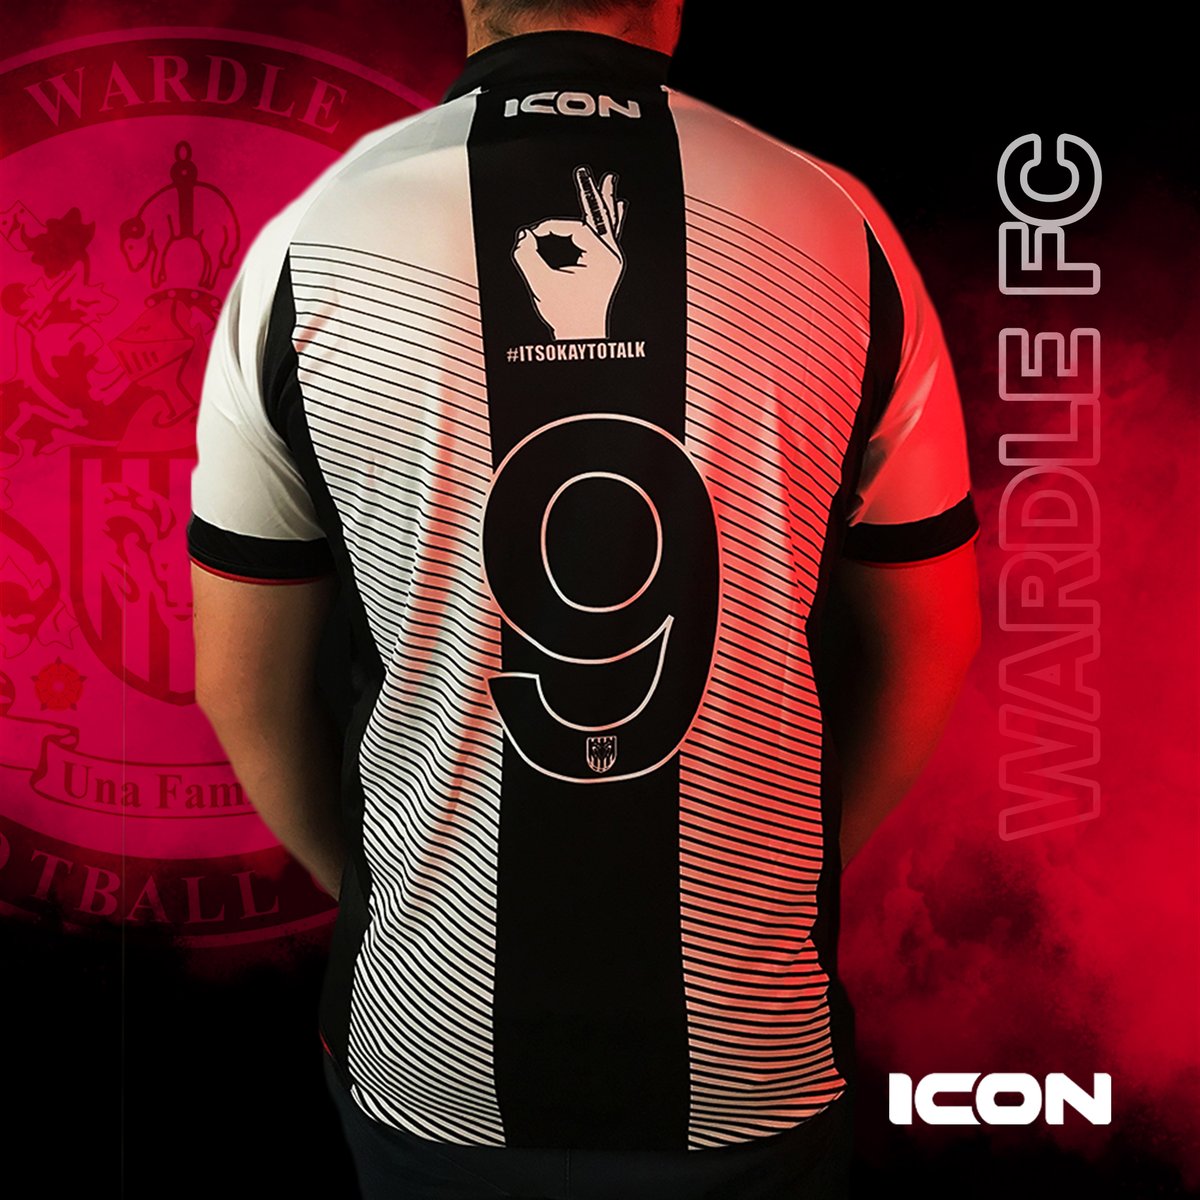 Ready for Kick-off! ⚽ @Wardle_FC is now equipped with the latest kit from ICON 💪 #iconsports #iconsportsuk #teamwear #football